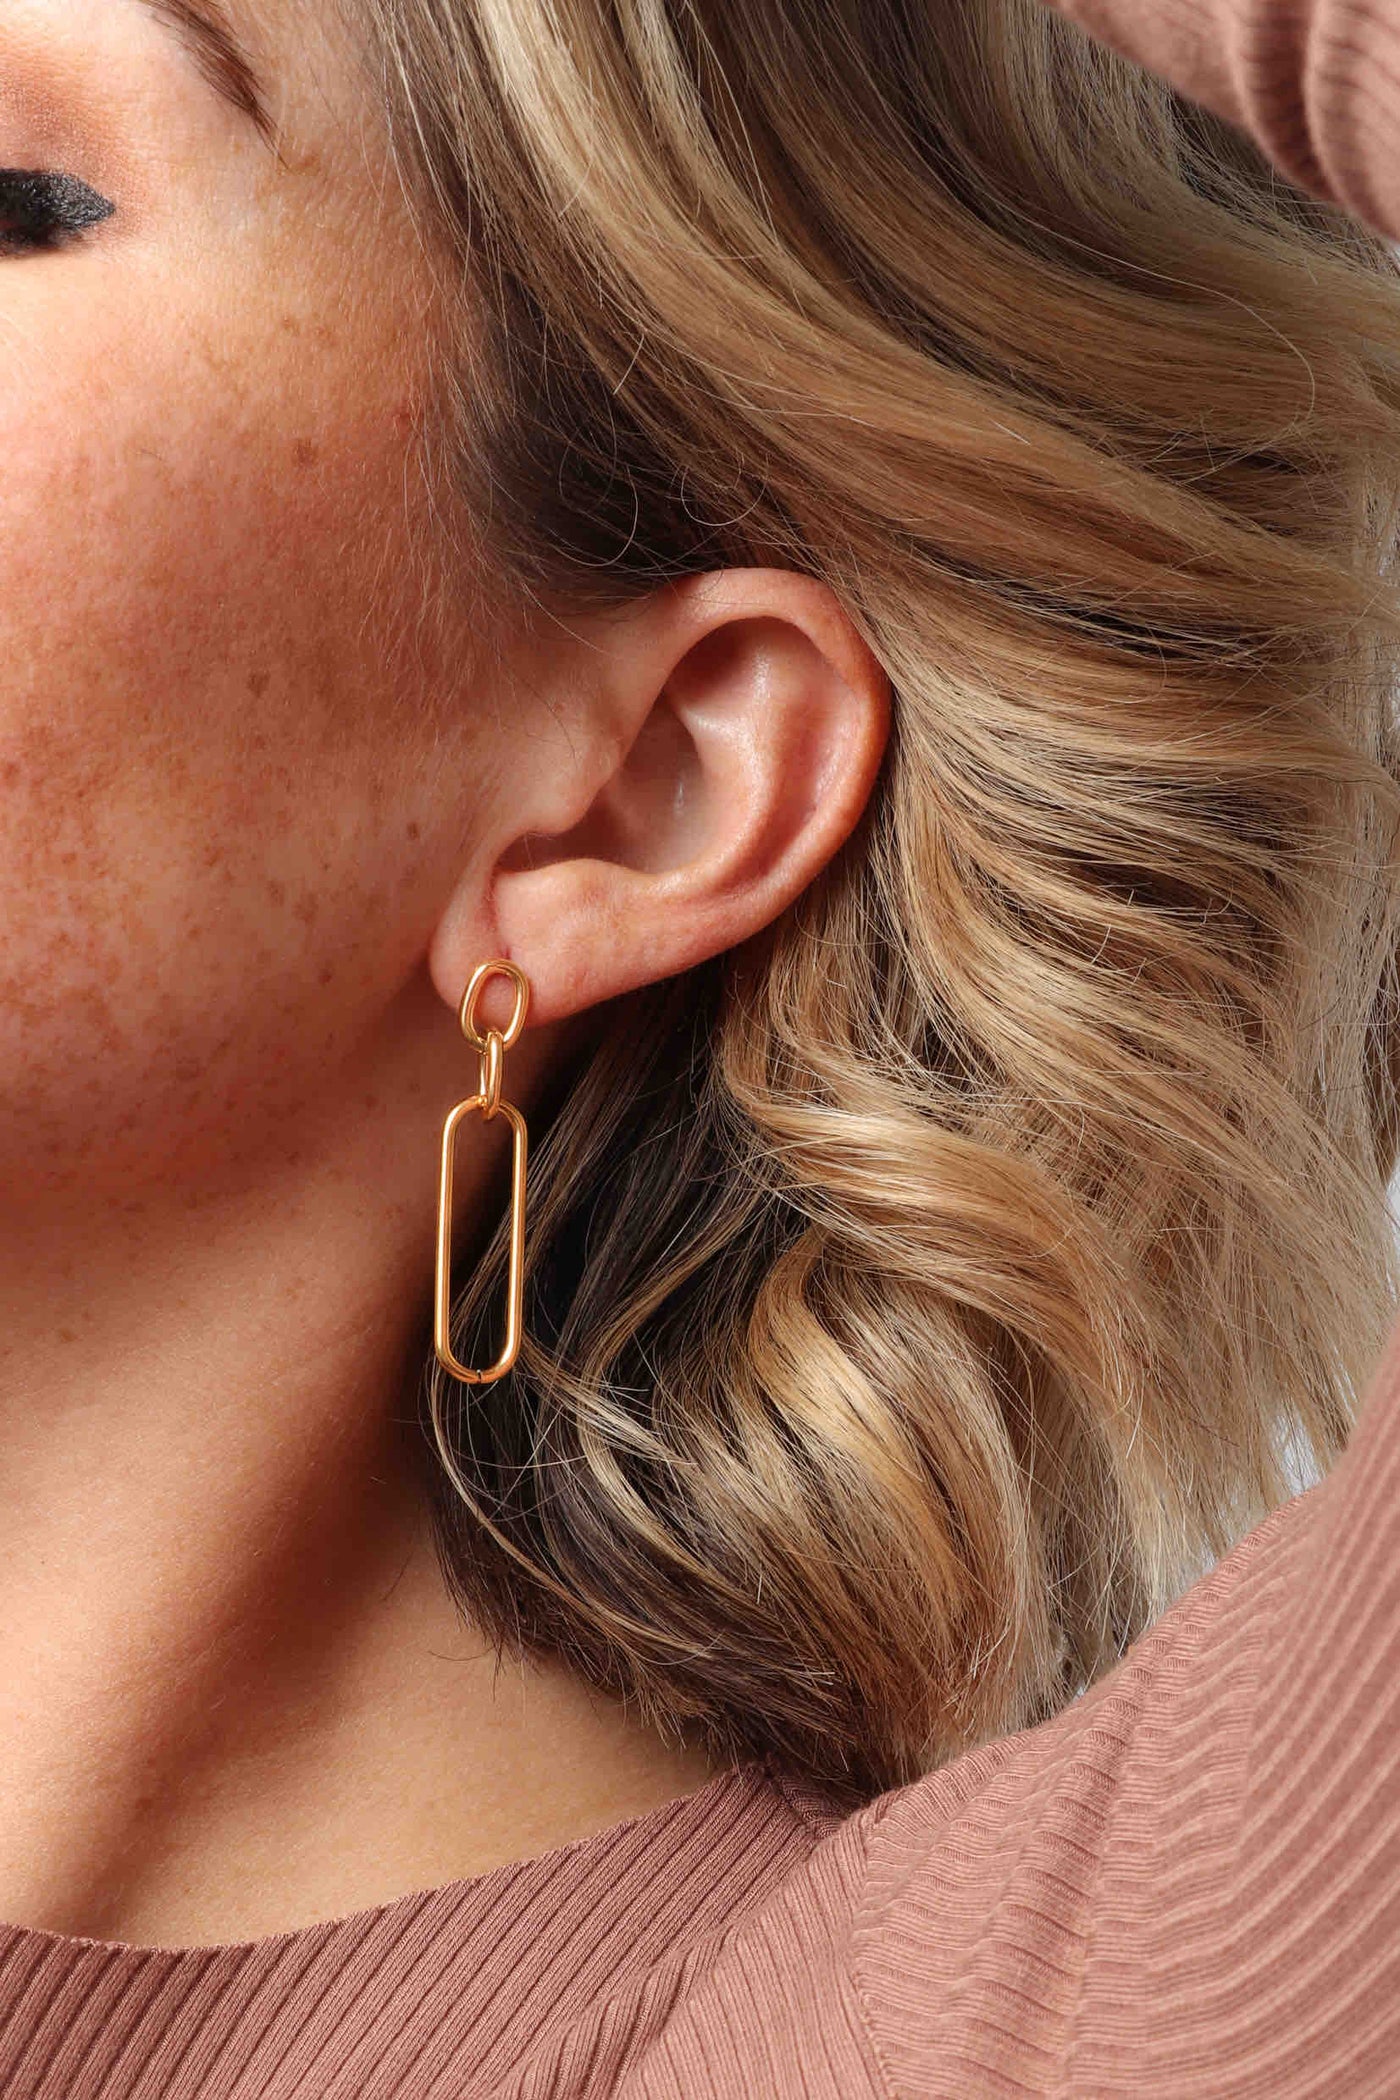 Marrin Costello wearing Marrin Costello Jewelry Mariposa Drops paperclip and Anita Chain post back earrings — for pierced ears. Waterproof, sustainable, hypoallergenic. 14k gold plated stainless steel.